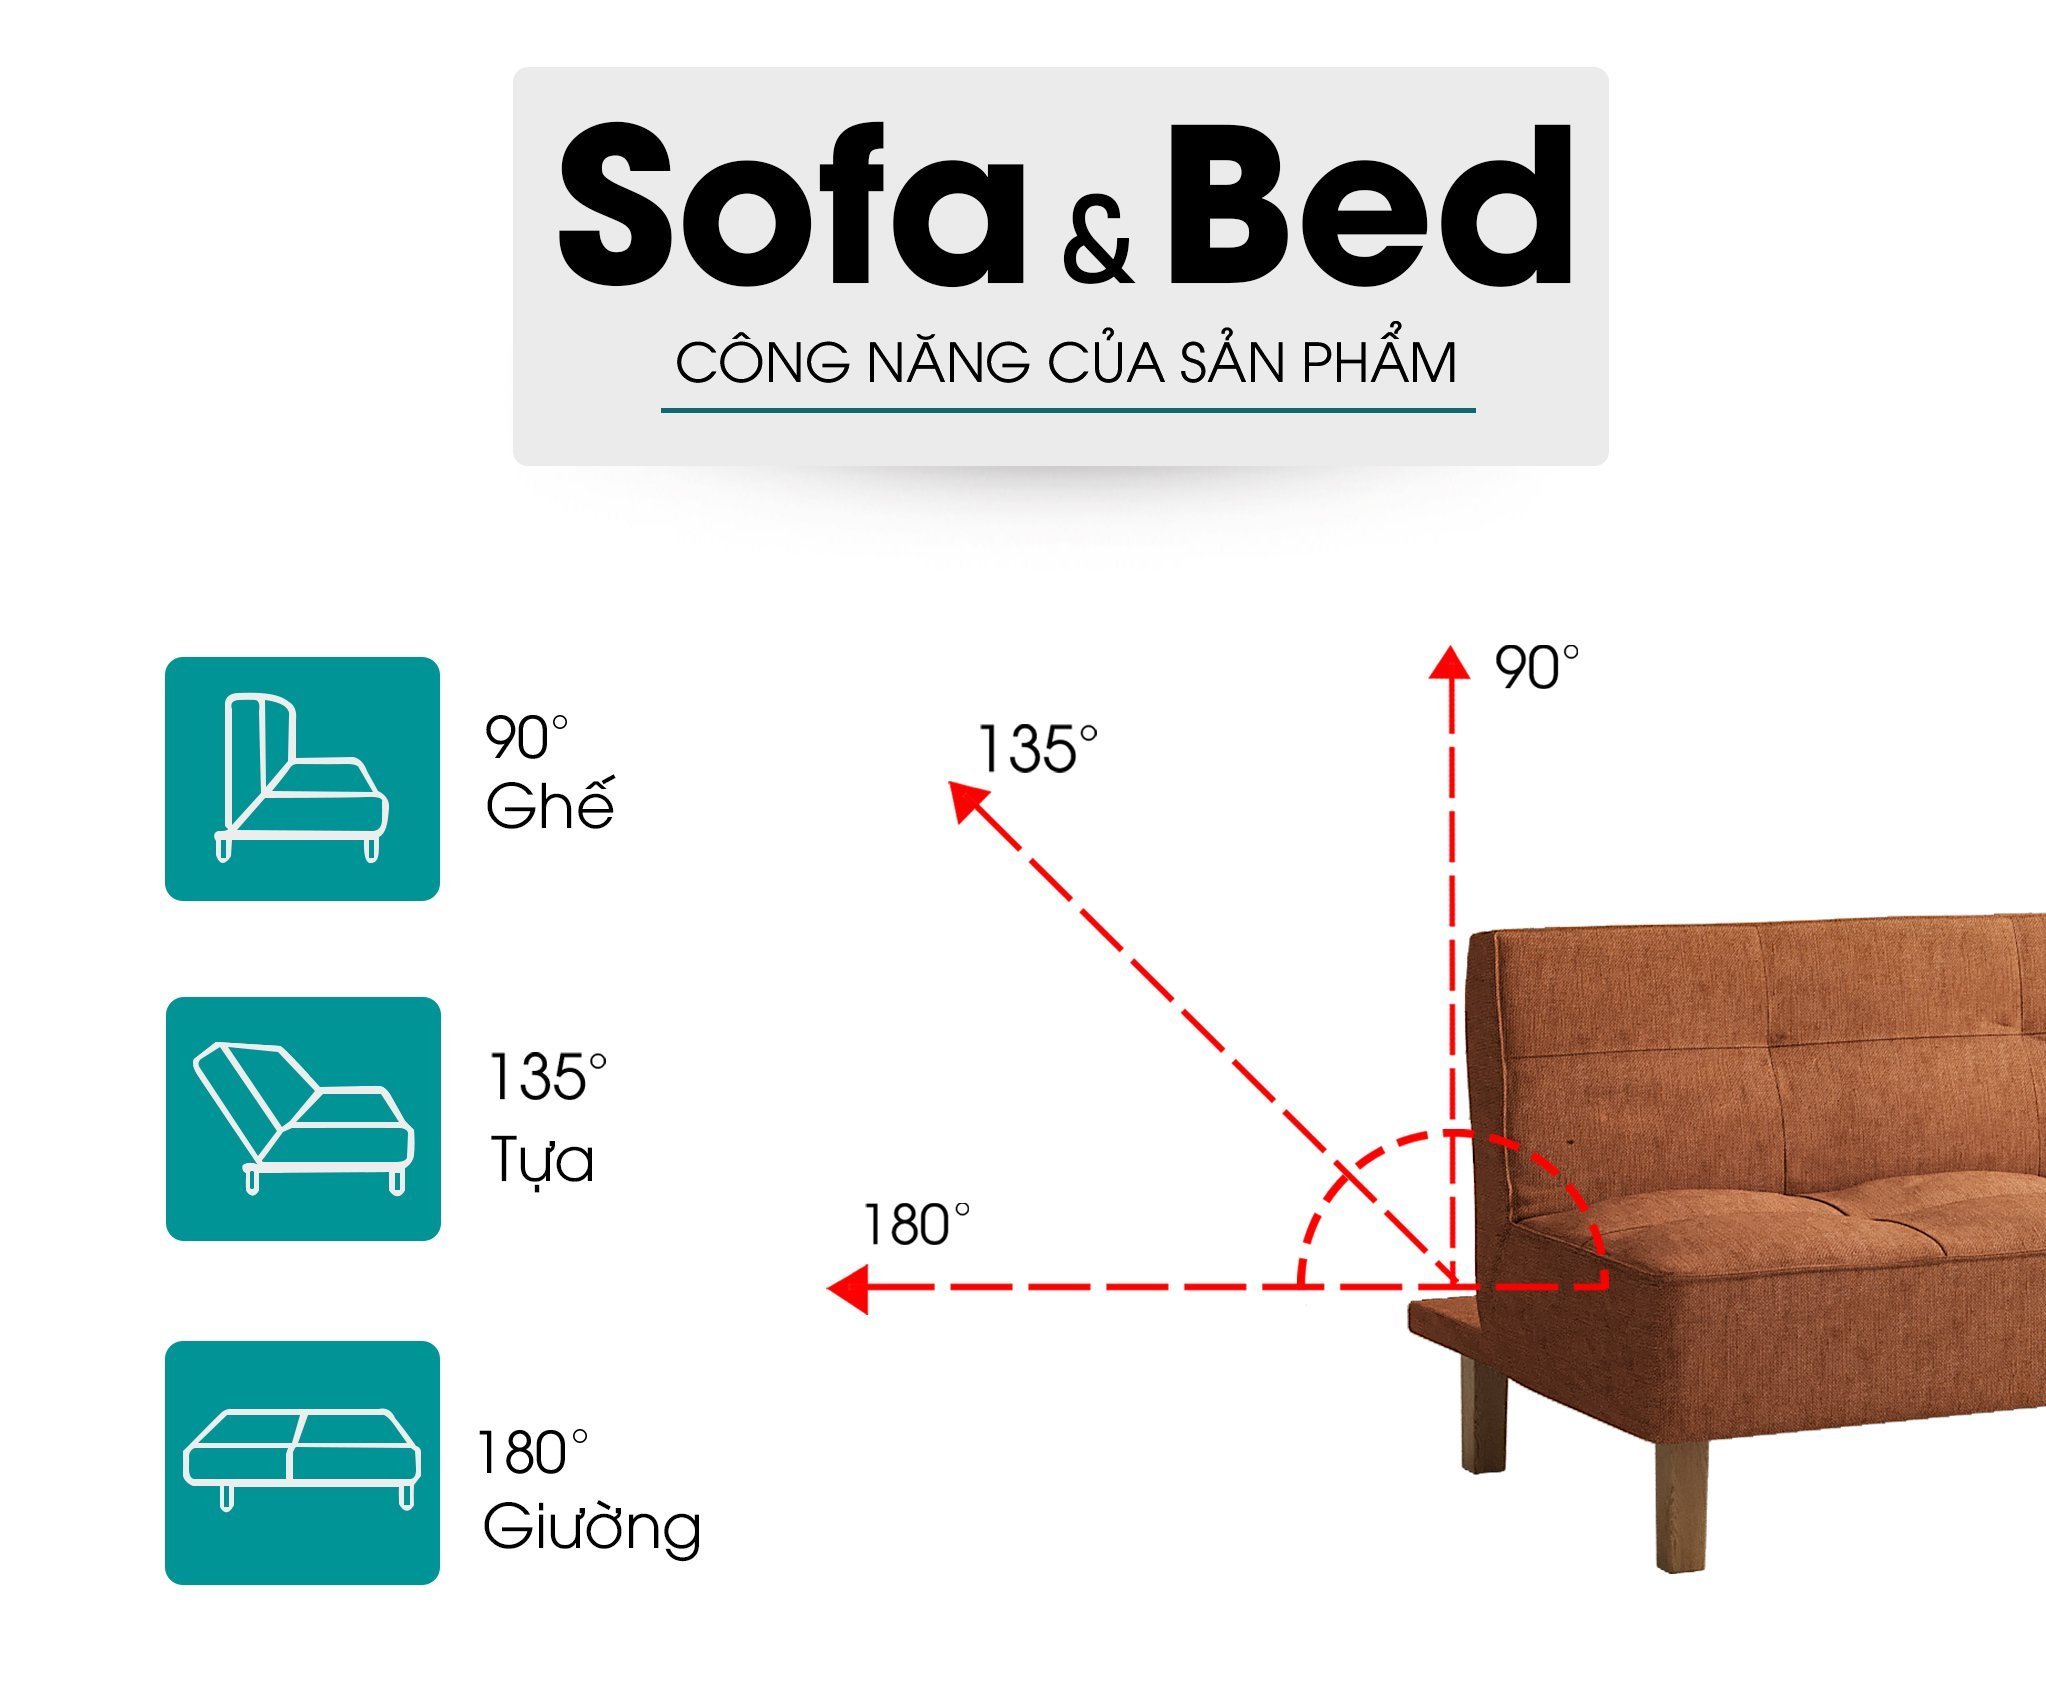 sofa-bed-xdaily